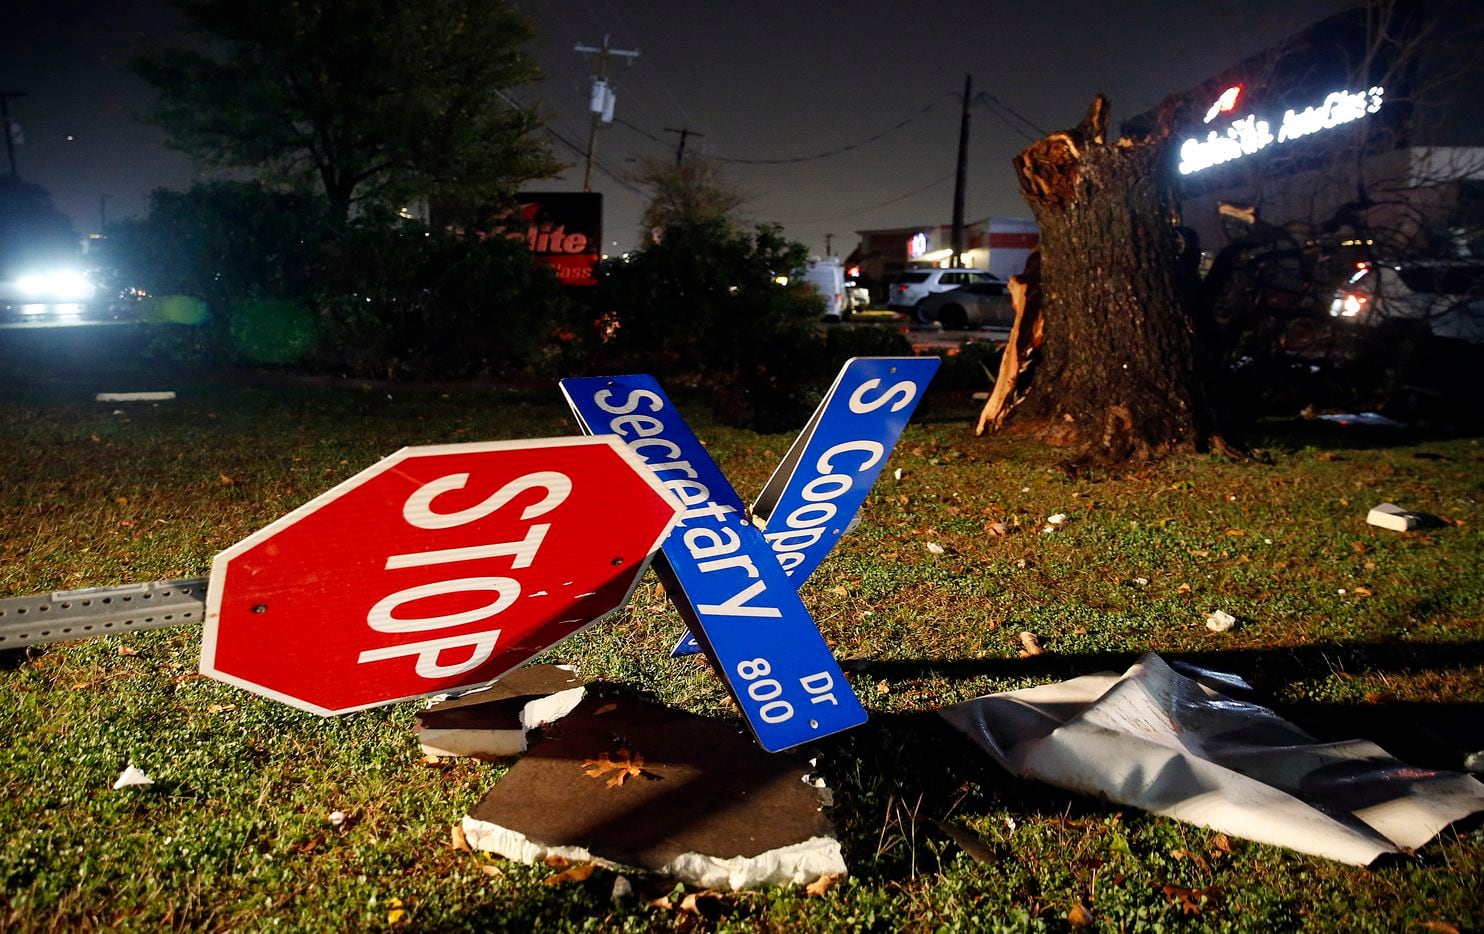 The street sign on Cooper St. at Secretary Dr. was blown over in Arlington when a tornado-warned storm blew through, Tuesday night, November 24, 2020. No one was seriously injured across the street at the Burger Box restaurant.